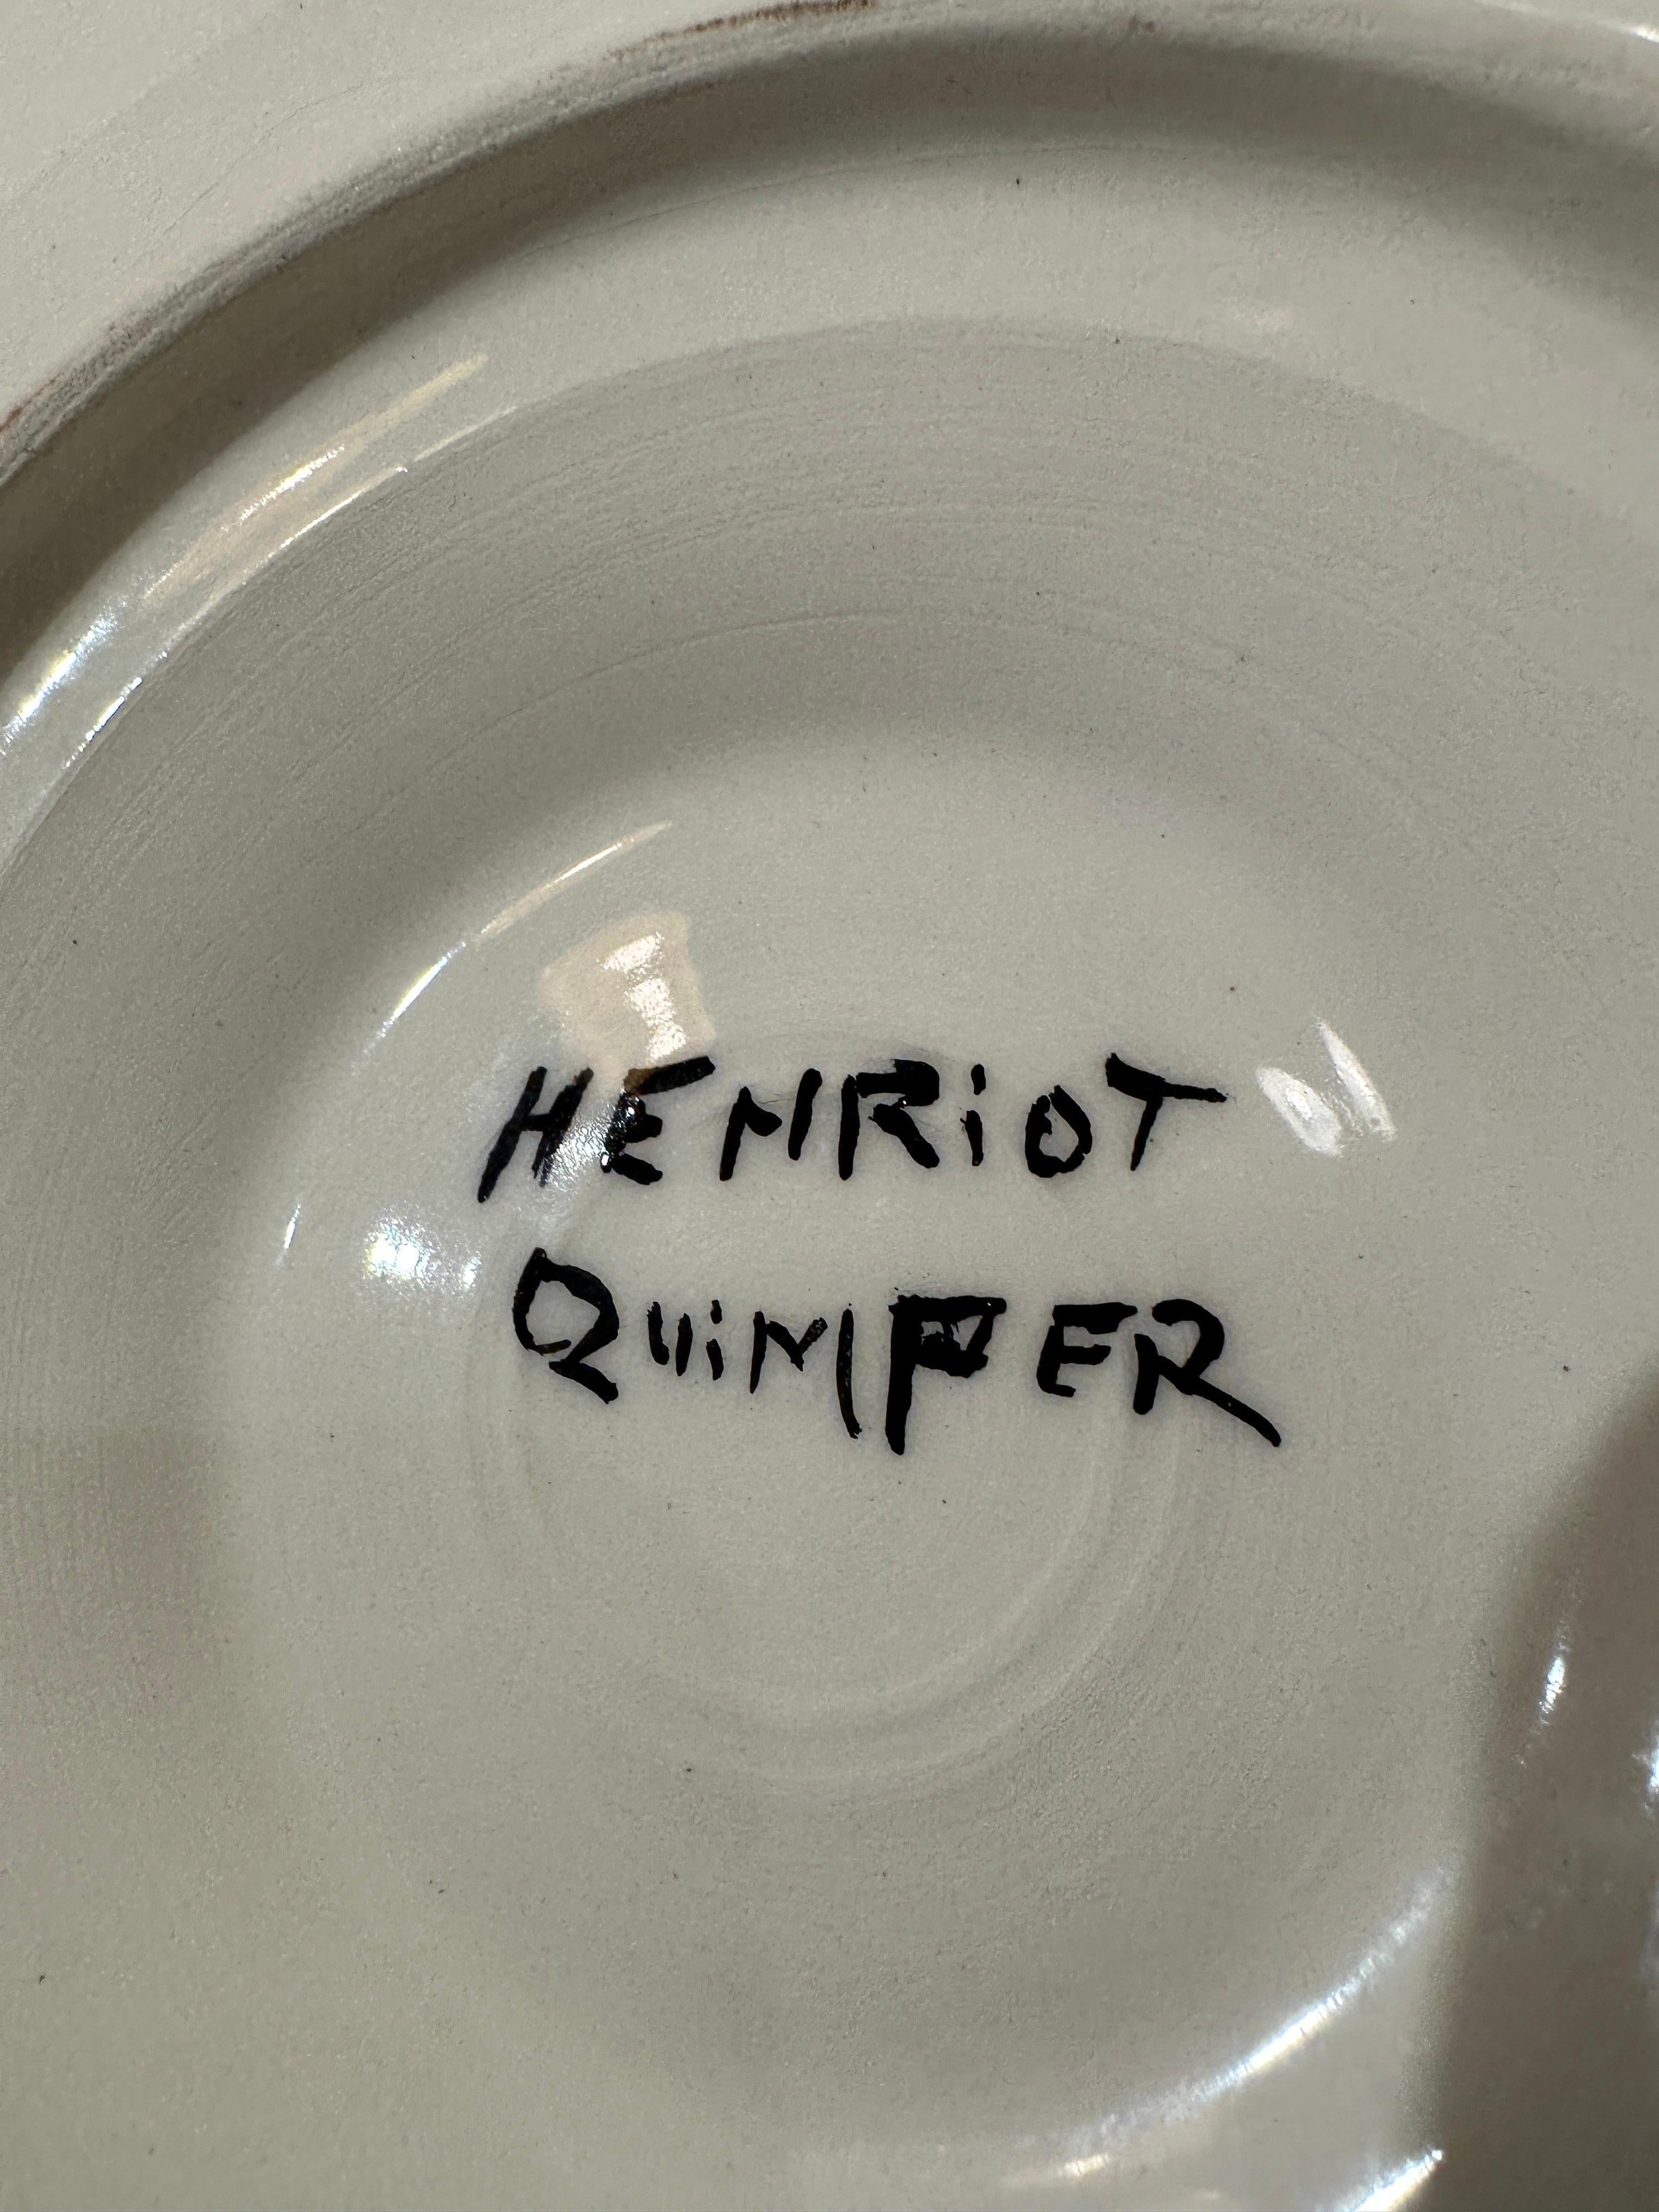 This RARE complete set of 13 (1 platter and 12 plates) Henriot Quimper black faience oyster plates is a stunning example of the beauty and craftsmanship of Quimper's original creations.  Each plate features a unique and intricate hand-painted design